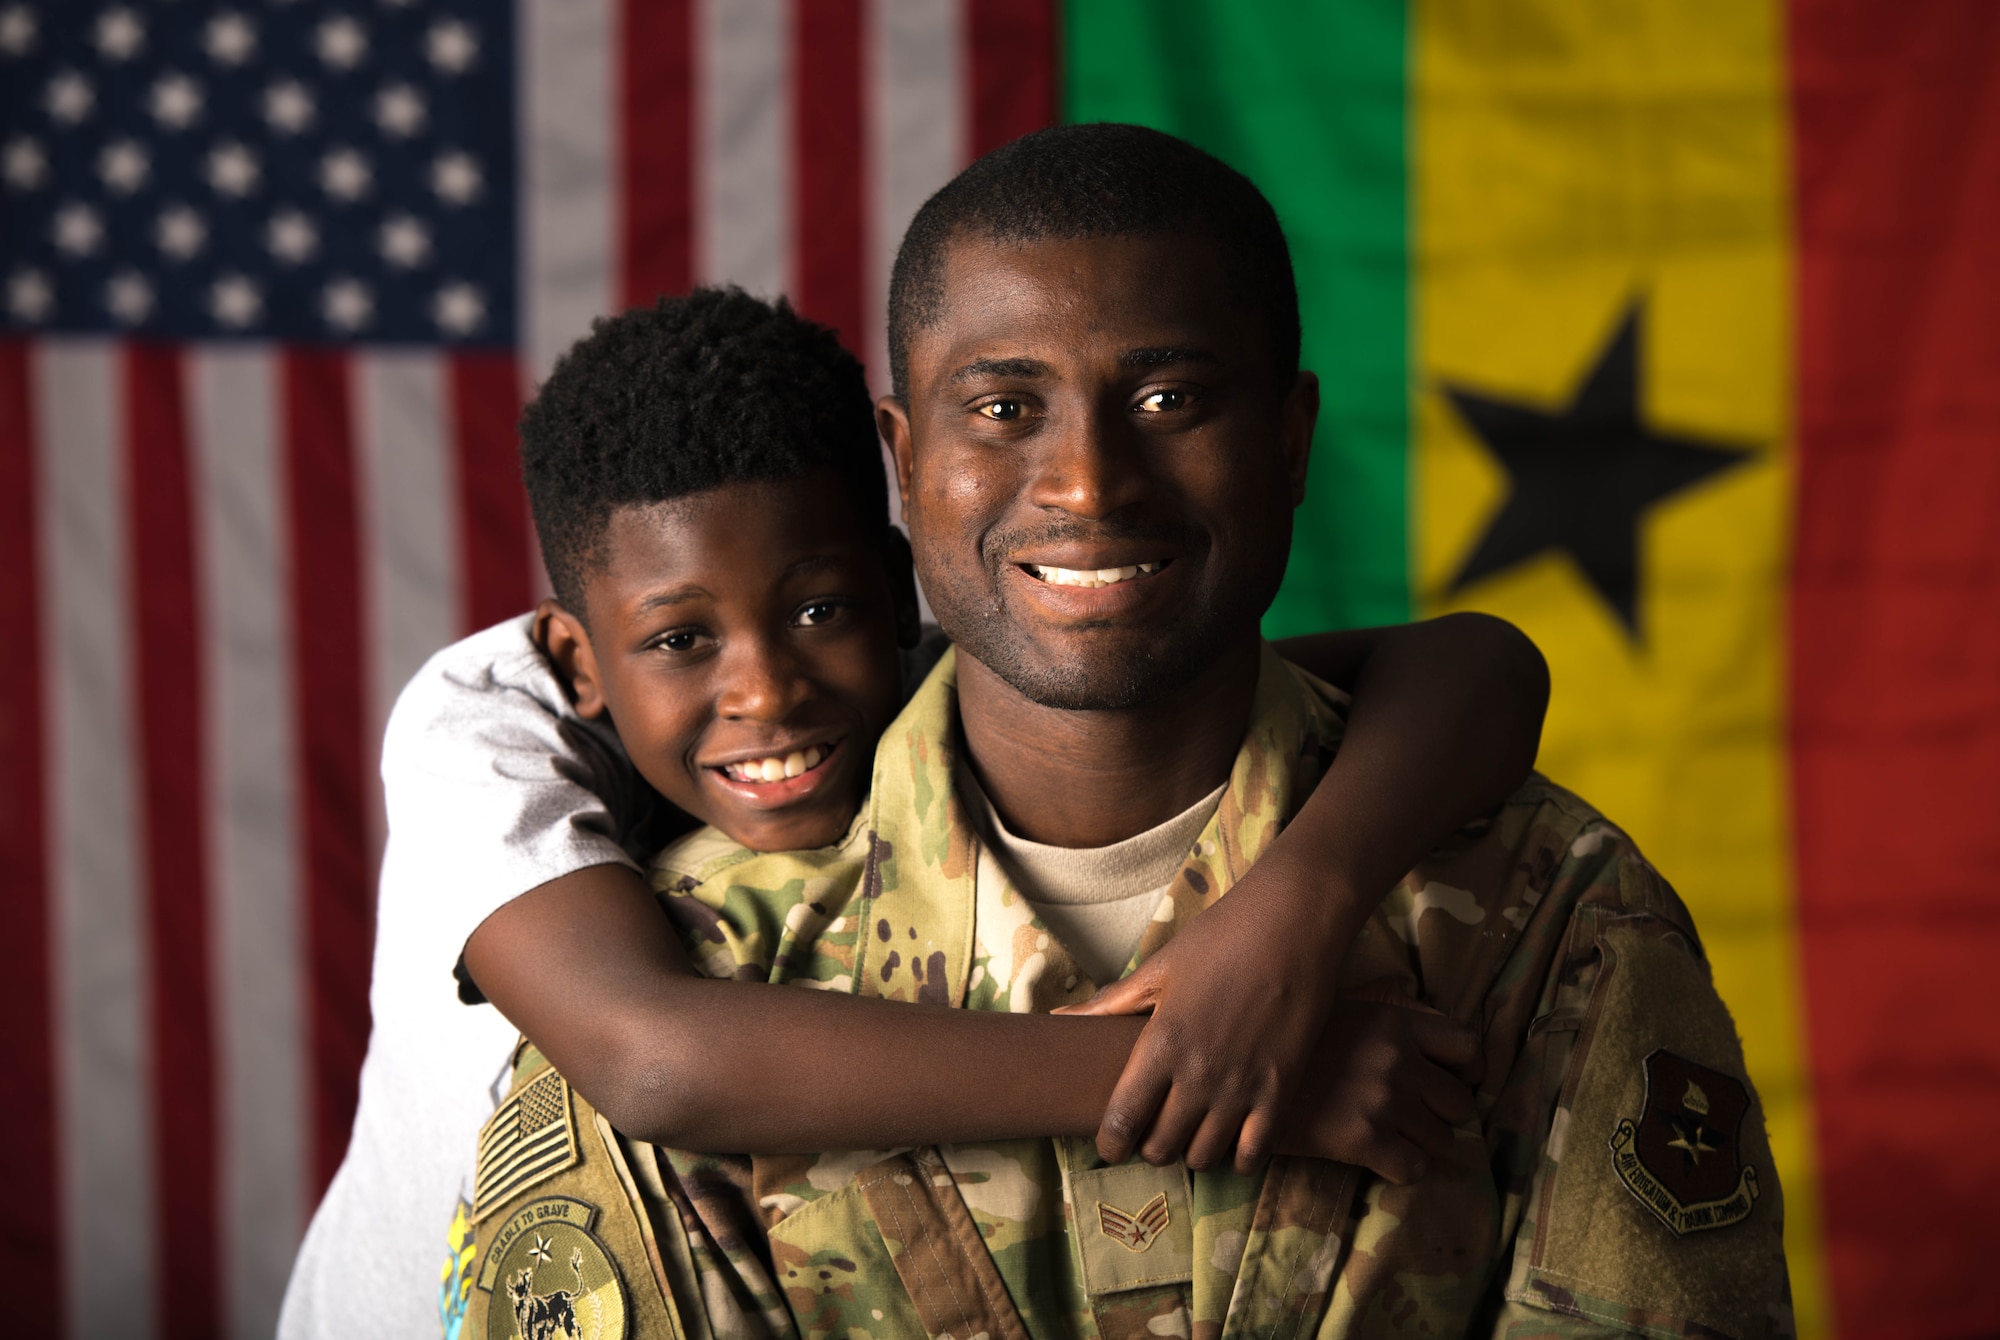 U.S. Air Force Senior Airman Akwasi Agyeman-Prempeh, 56th Force Support Squadron storeroom apprentice, and his son Kofi pose for a photo Oct. 23, 2019 at Luke Air Force Base, Ariz.